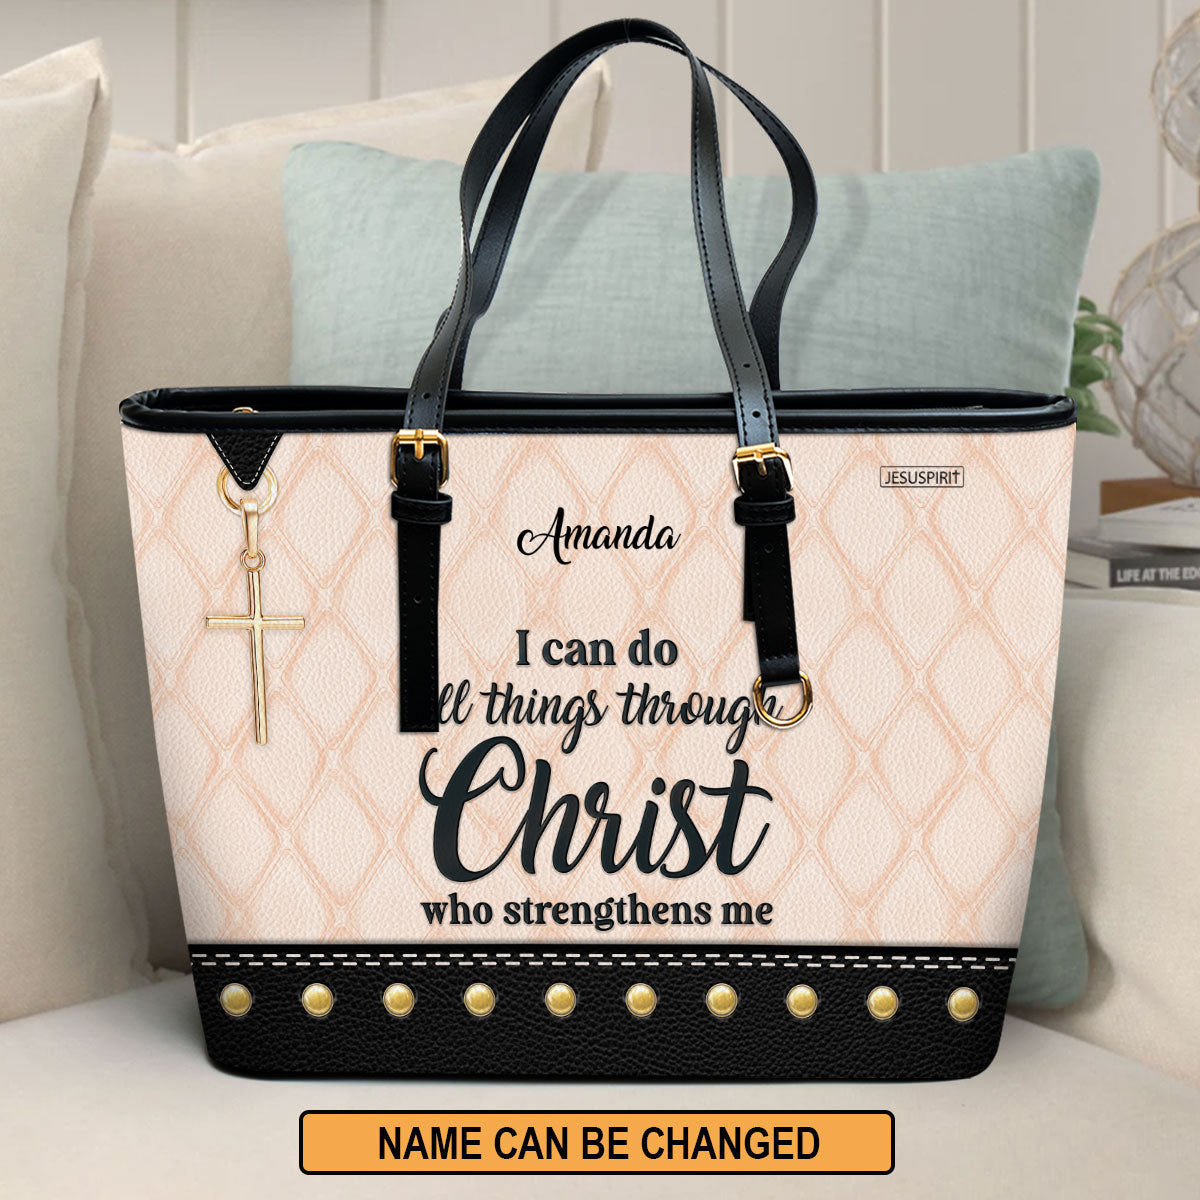 I Can Do All Things Through Christ - Special Large Leather Tote Bag HHN418